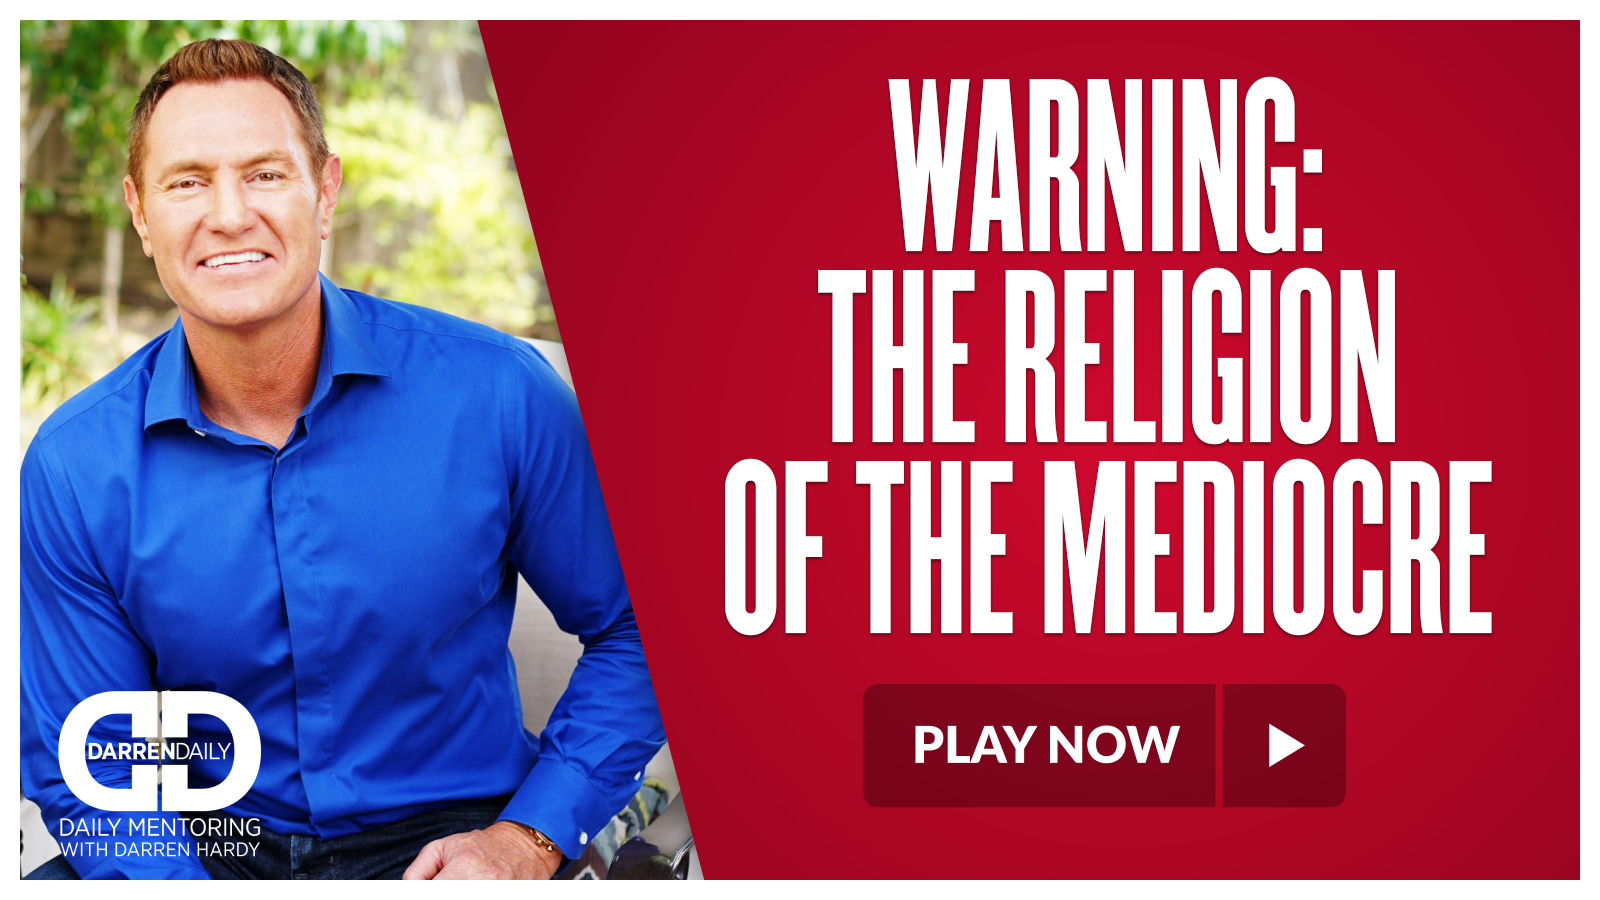 Warning: The Religion of the Mediocre